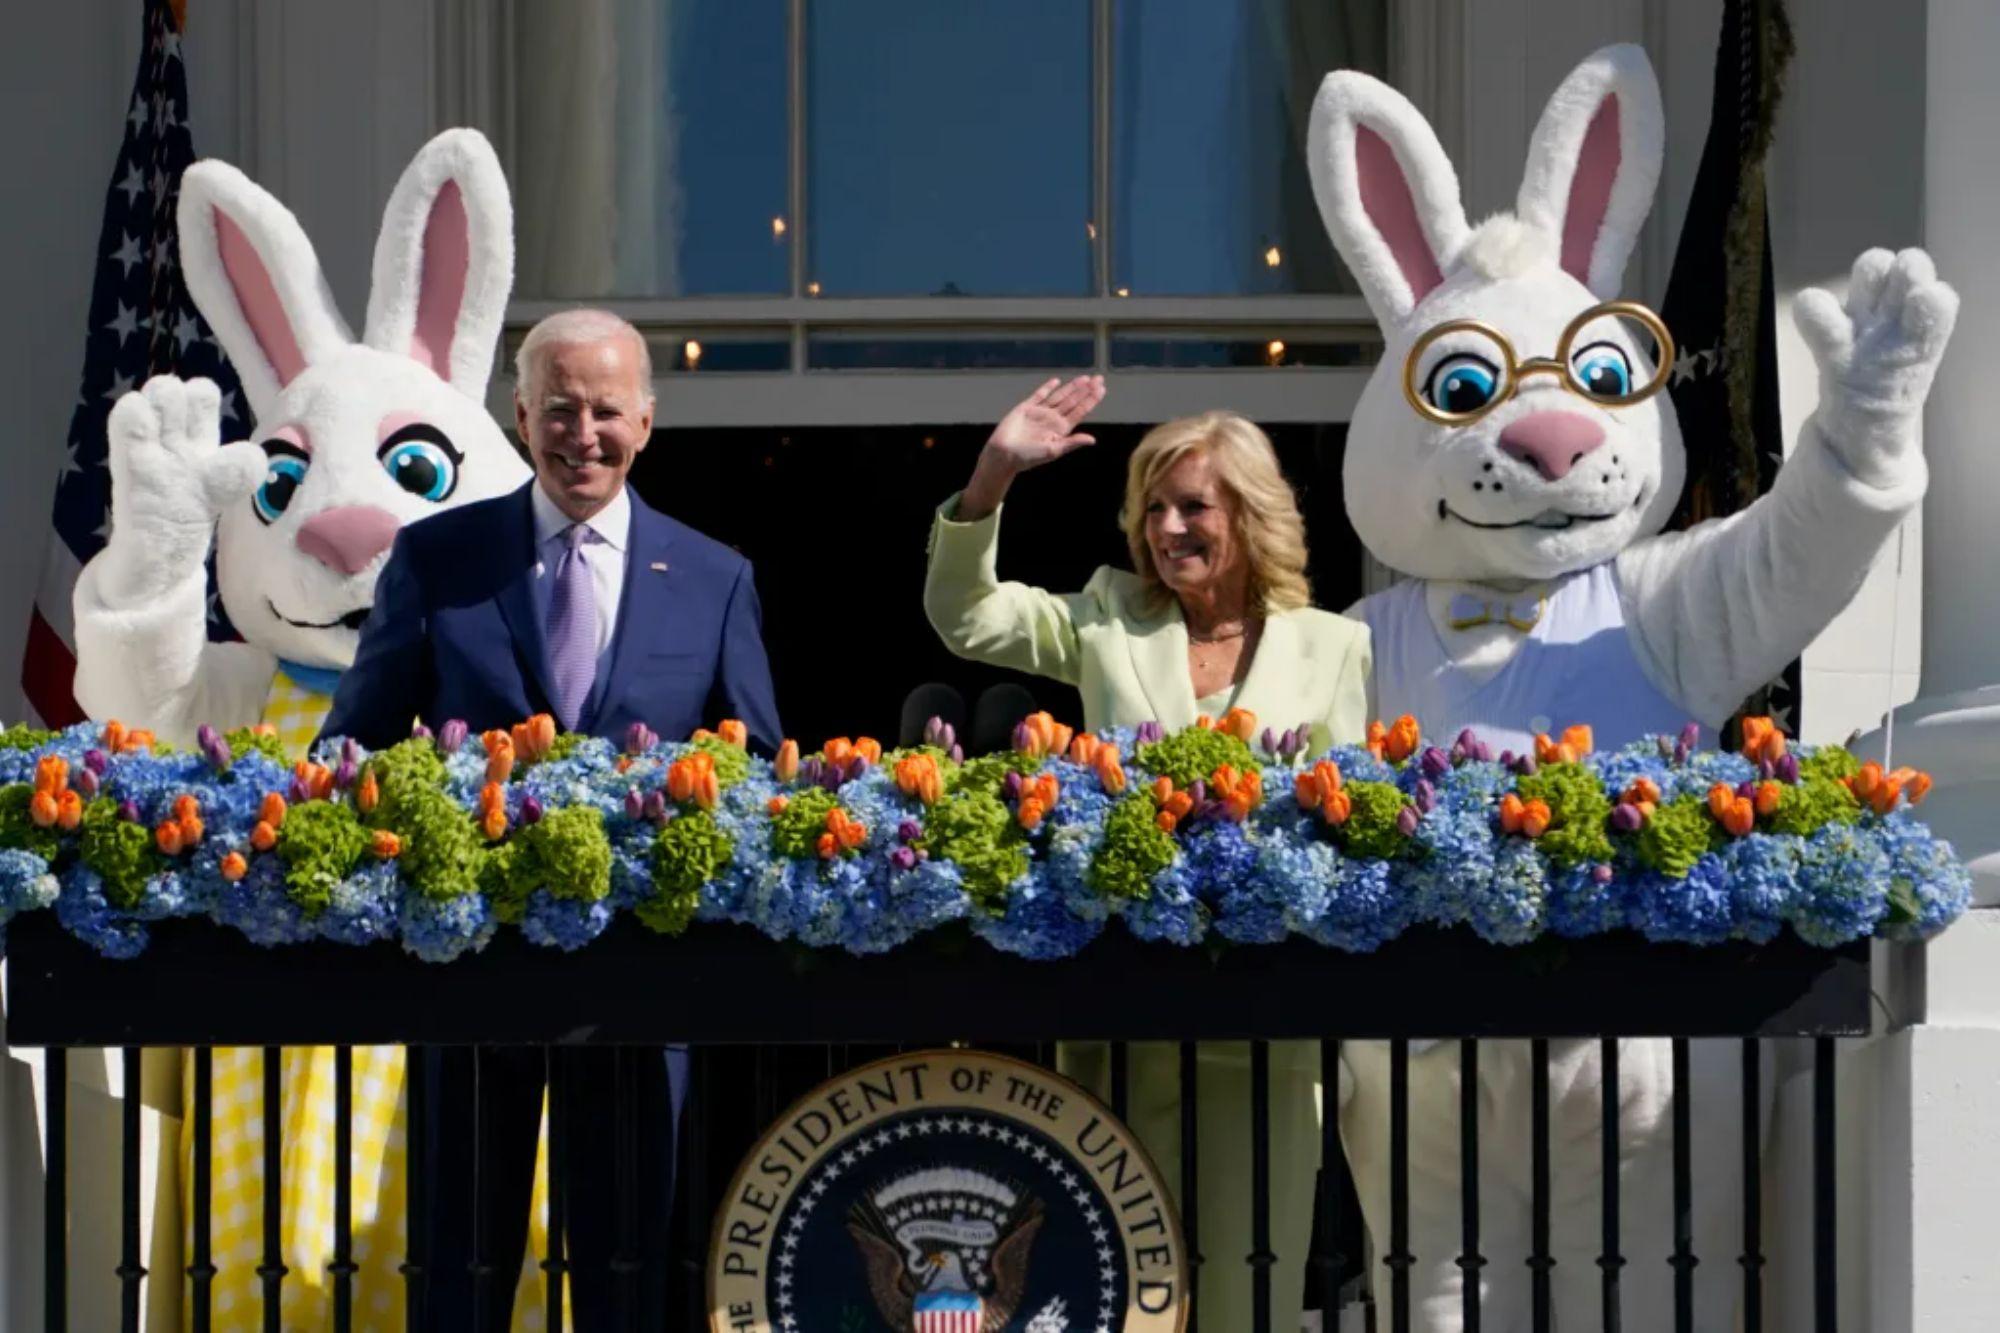 Biden faces backlash over Trans Day of Visibility on Easter as the White House raps politicians for being dishonest